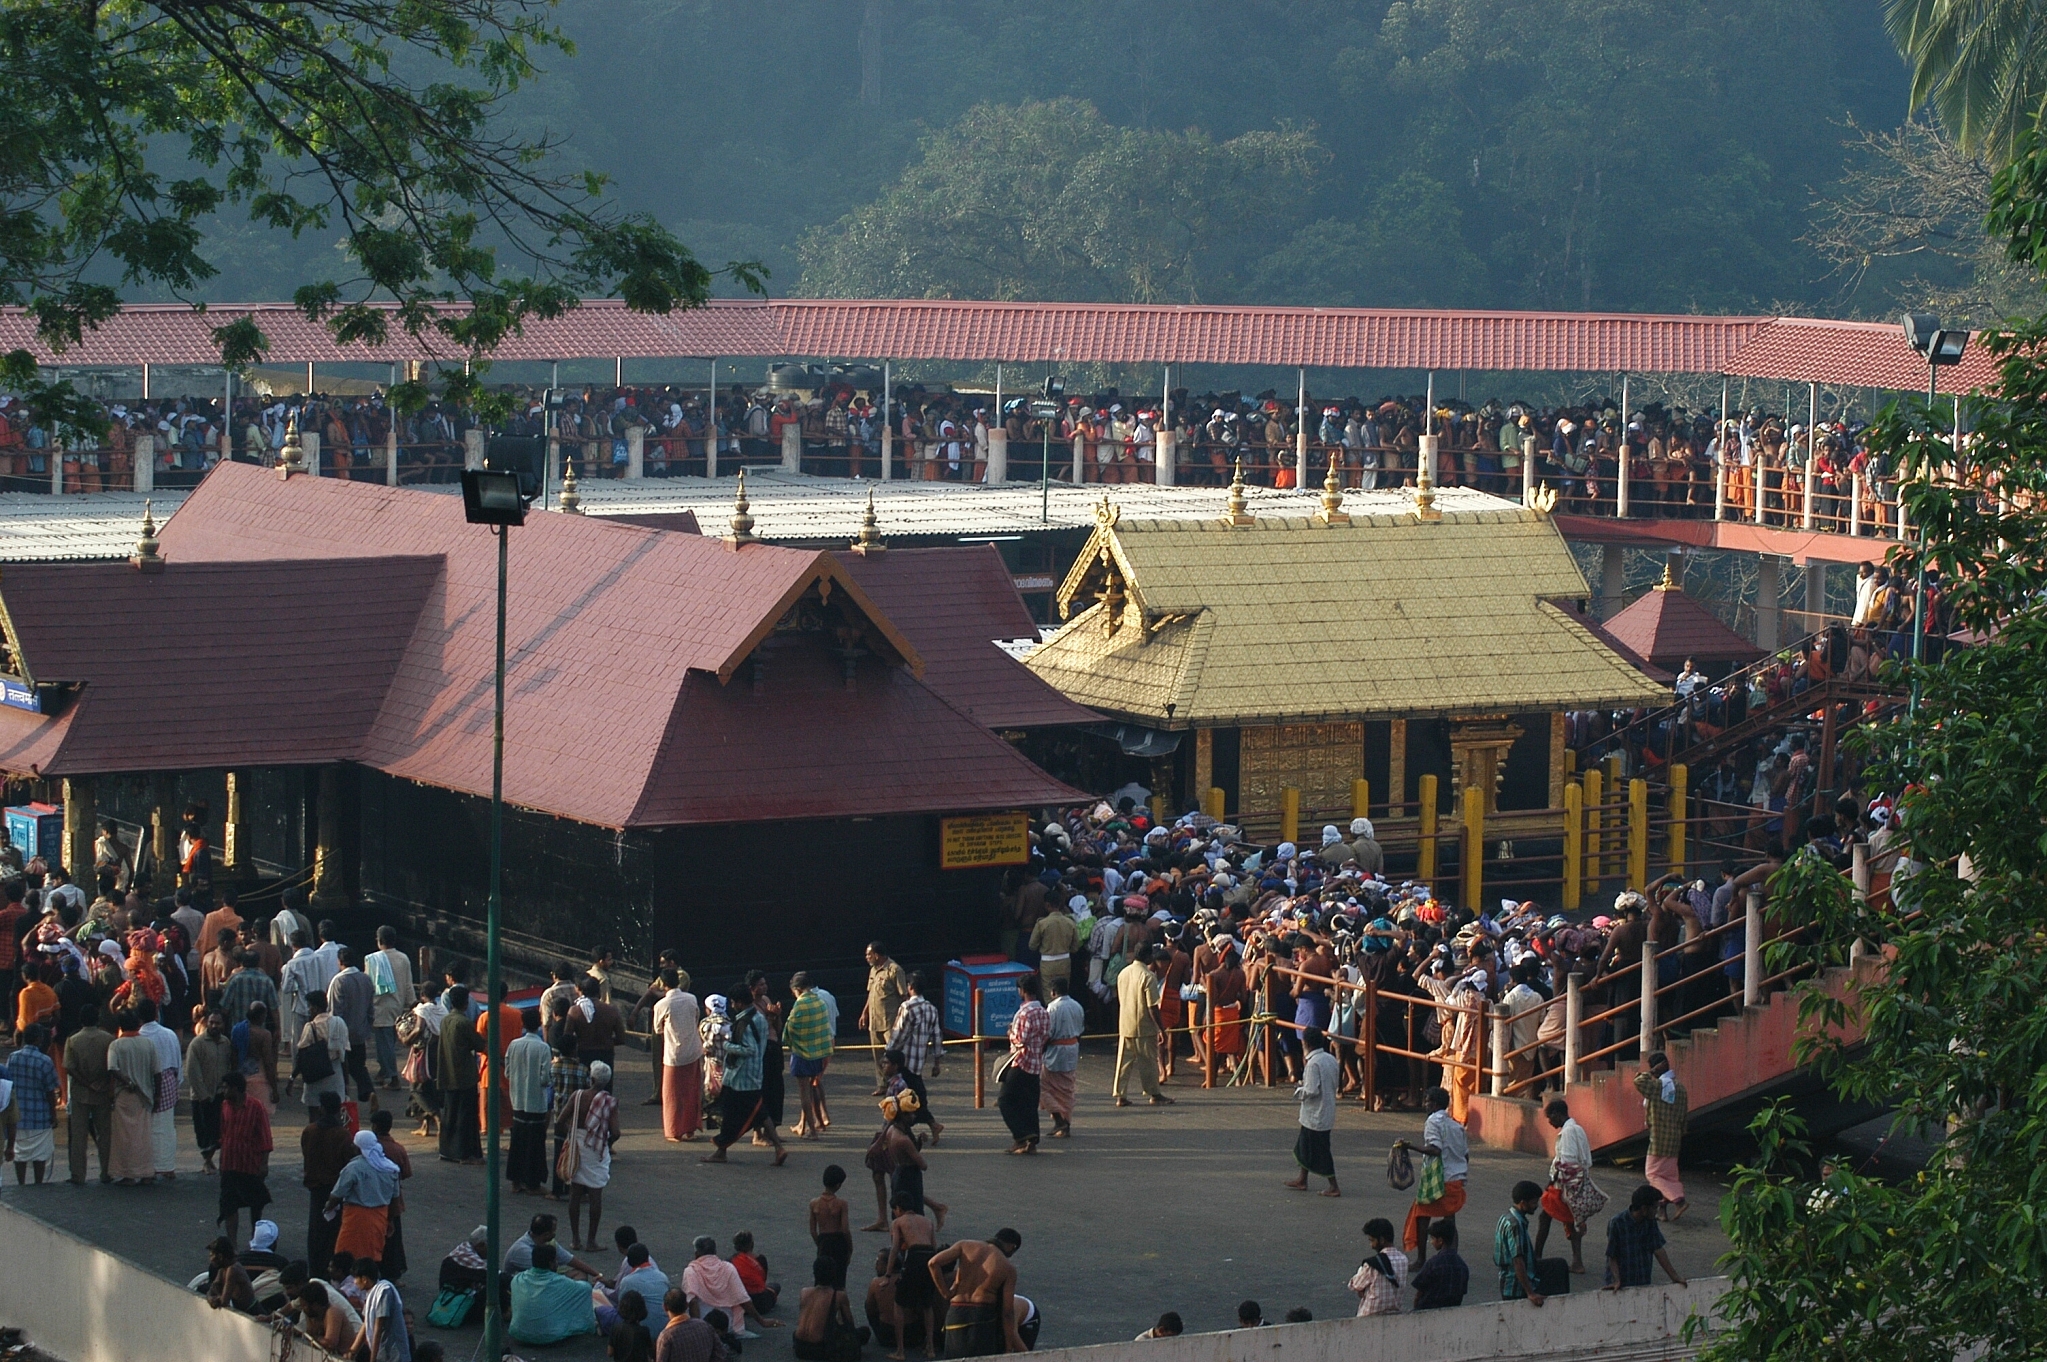 Devotees at the Sabarimala temple complex (Shankar/The India Today Group/Getty Images)